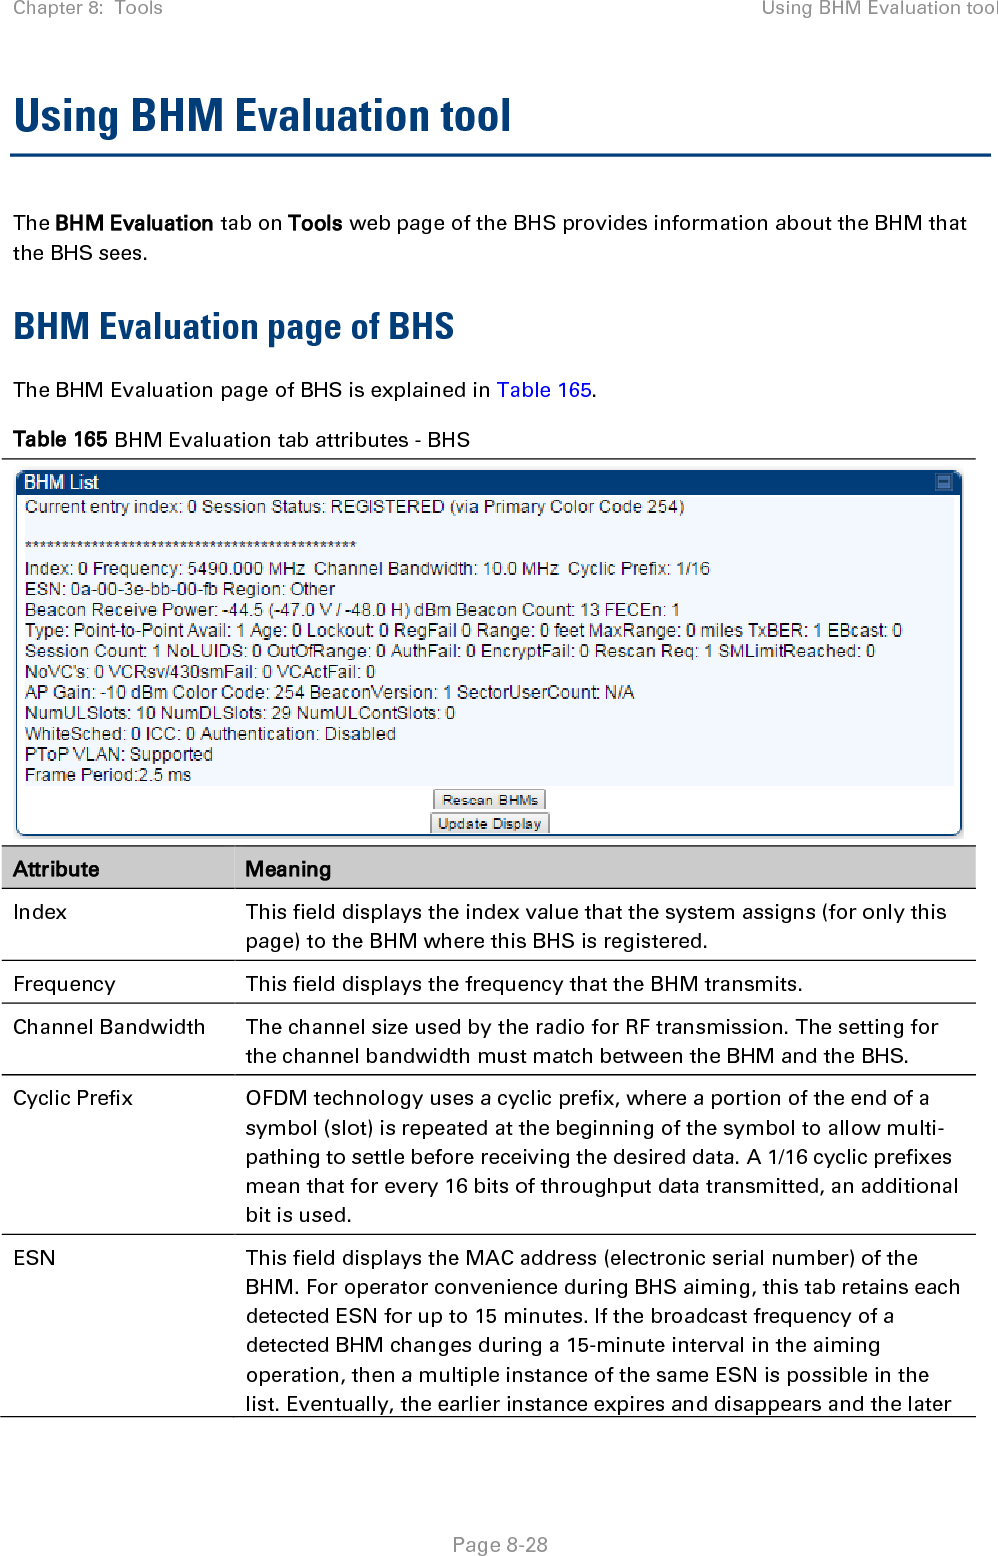 Chapter 8:  Tools Using BHM Evaluation tool   Page 8-28 Using BHM Evaluation tool The BHM Evaluation tab on Tools web page of the BHS provides information about the BHM that the BHS sees. BHM Evaluation page of BHS The BHM Evaluation page of BHS is explained in Table 165. Table 165 BHM Evaluation tab attributes - BHS  Attribute Meaning Index This field displays the index value that the system assigns (for only this page) to the BHM where this BHS is registered. Frequency This field displays the frequency that the BHM transmits. Channel Bandwidth The channel size used by the radio for RF transmission. The setting for the channel bandwidth must match between the BHM and the BHS.  Cyclic Prefix OFDM technology uses a cyclic prefix, where a portion of the end of a symbol (slot) is repeated at the beginning of the symbol to allow multi-pathing to settle before receiving the desired data. A 1/16 cyclic prefixes mean that for every 16 bits of throughput data transmitted, an additional bit is used. ESN This field displays the MAC address (electronic serial number) of the BHM. For operator convenience during BHS aiming, this tab retains each detected ESN for up to 15 minutes. If the broadcast frequency of a detected BHM changes during a 15-minute interval in the aiming operation, then a multiple instance of the same ESN is possible in the list. Eventually, the earlier instance expires and disappears and the later 